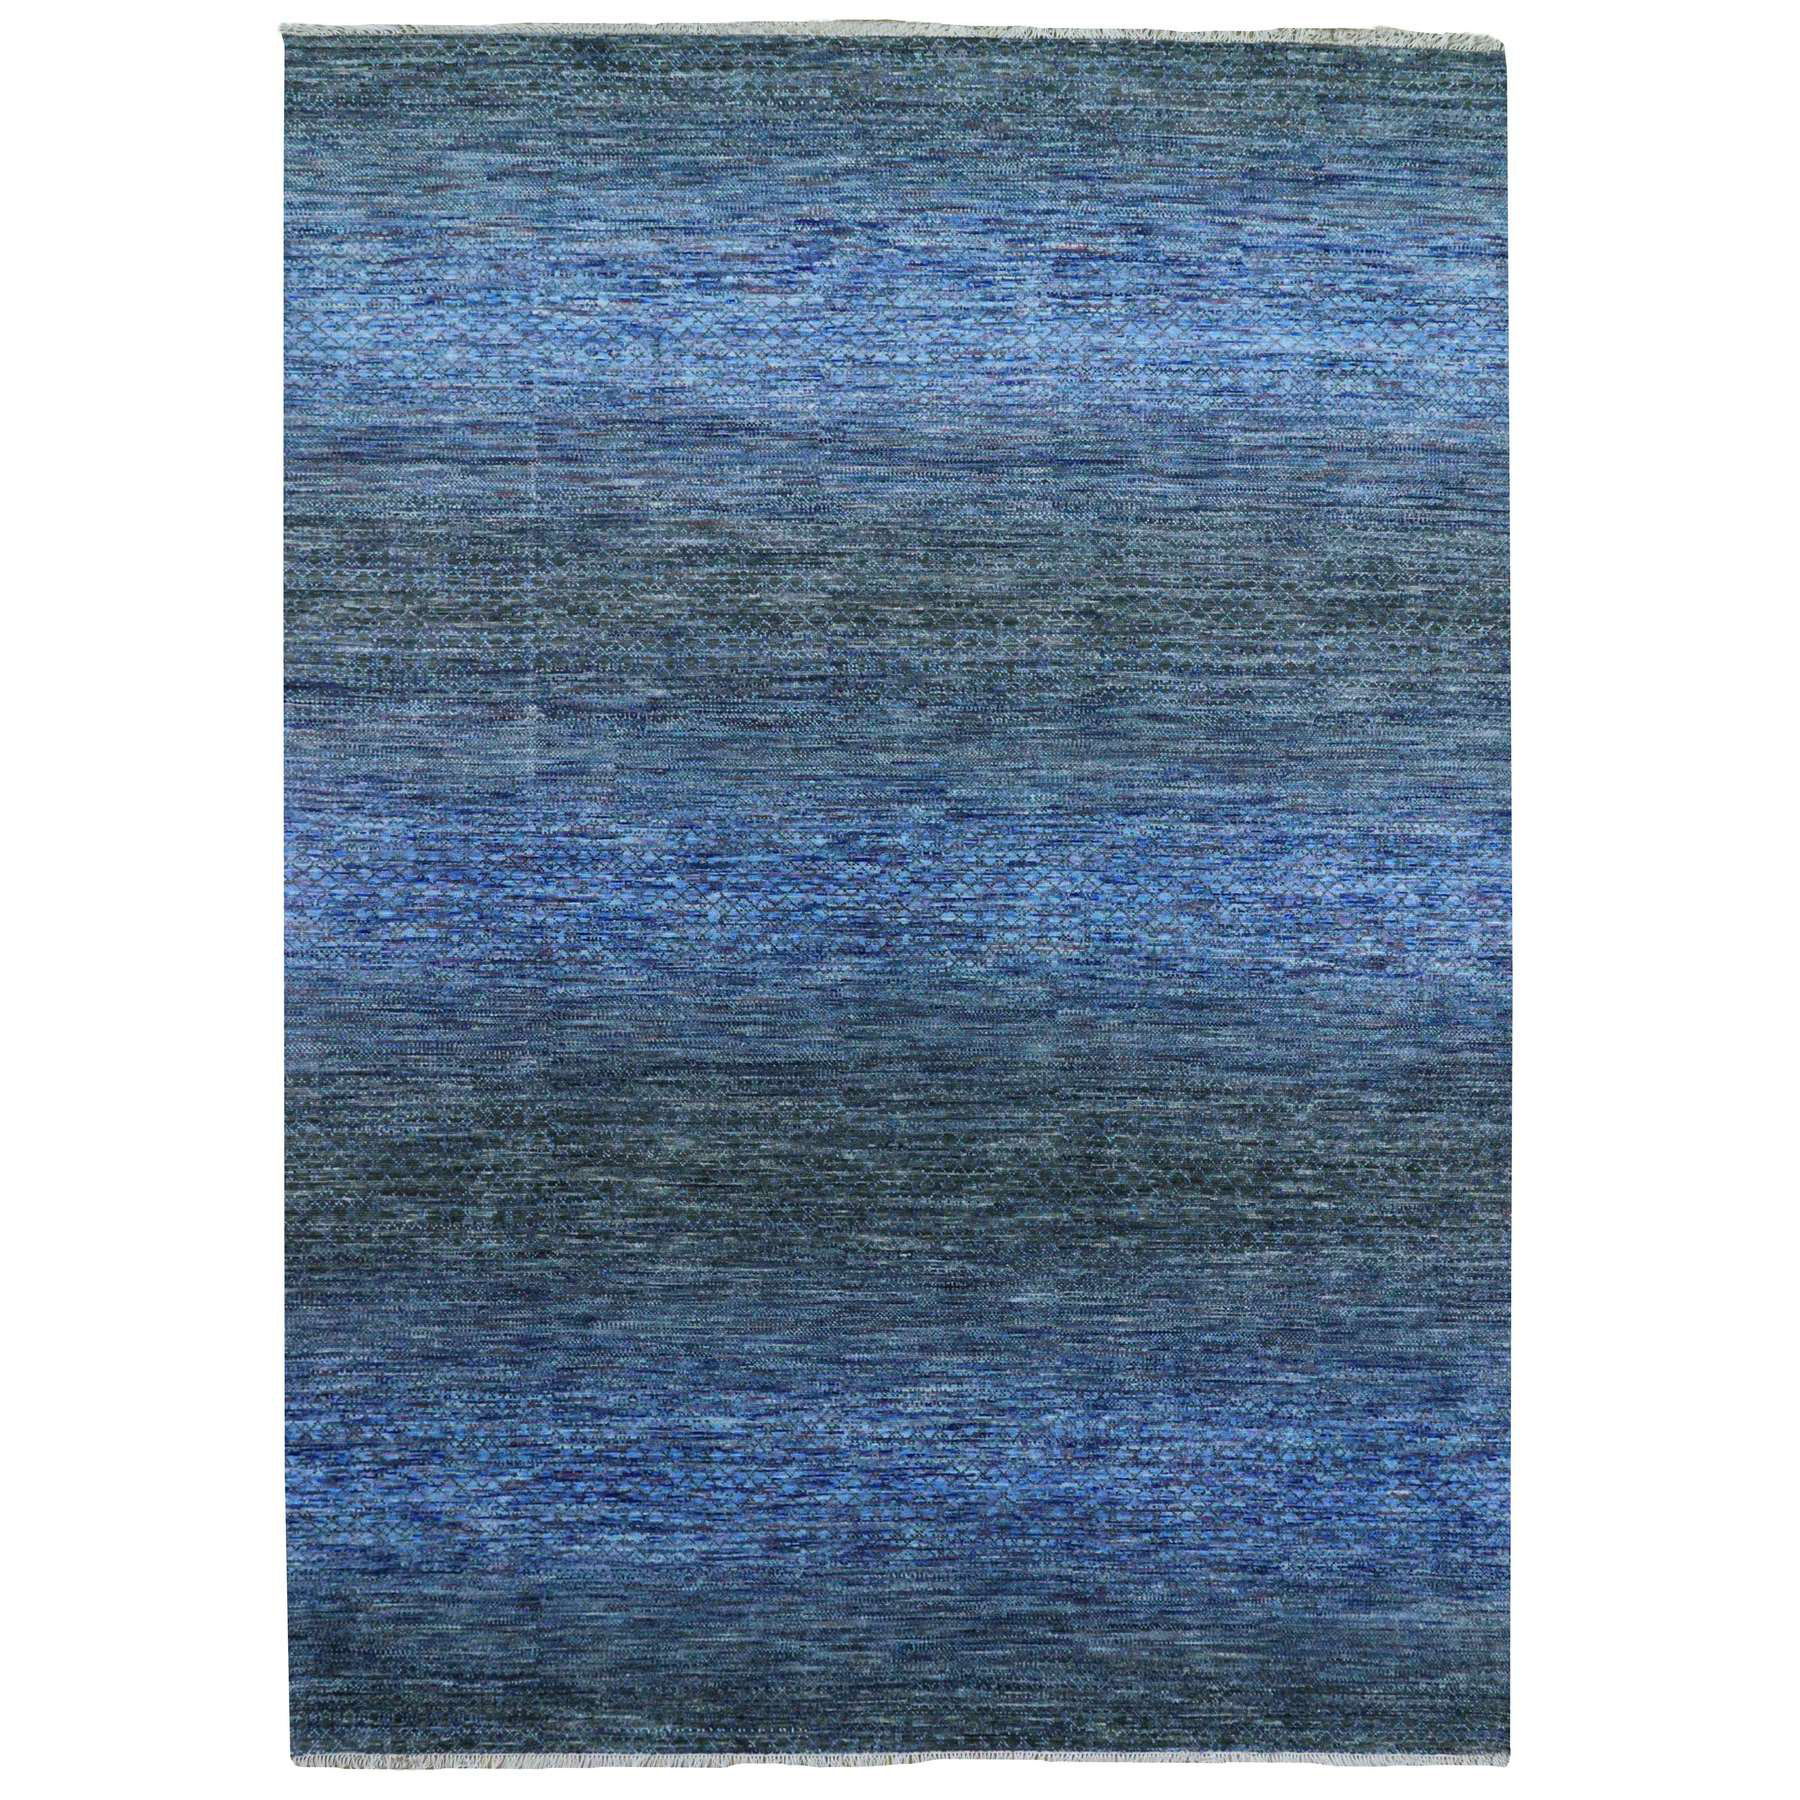 Knotted Acqua Vence Rug Atelier Tortil The Invisible Collection